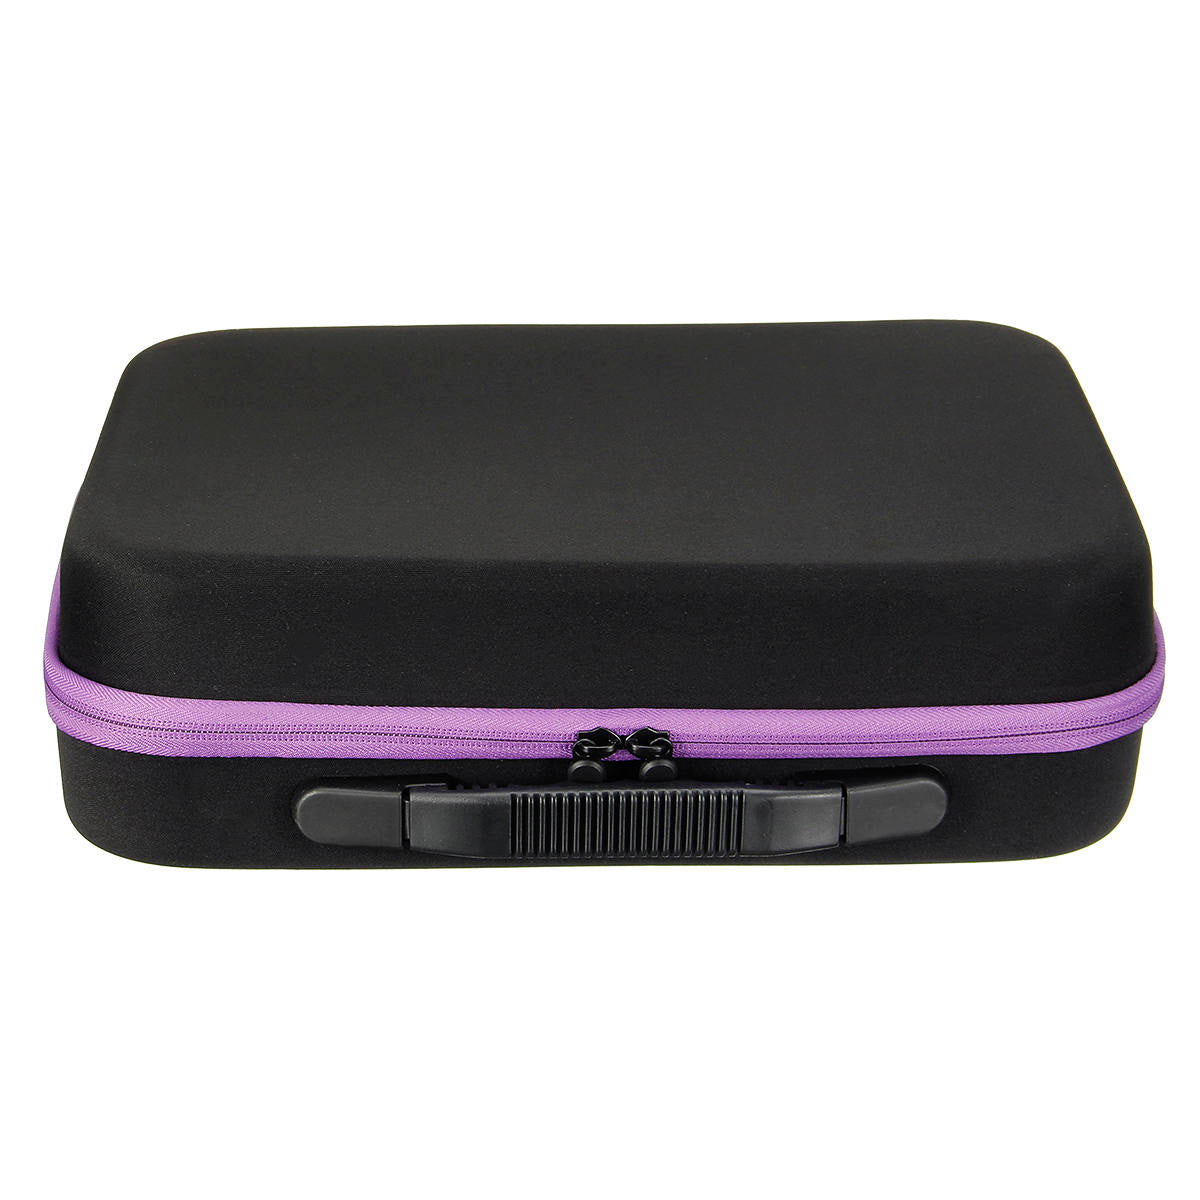 Portable Carrying Storage Case Bag Box For 70pcs 5ml Essential Oil Bottles with Bottle Opener & Bottle Stickers